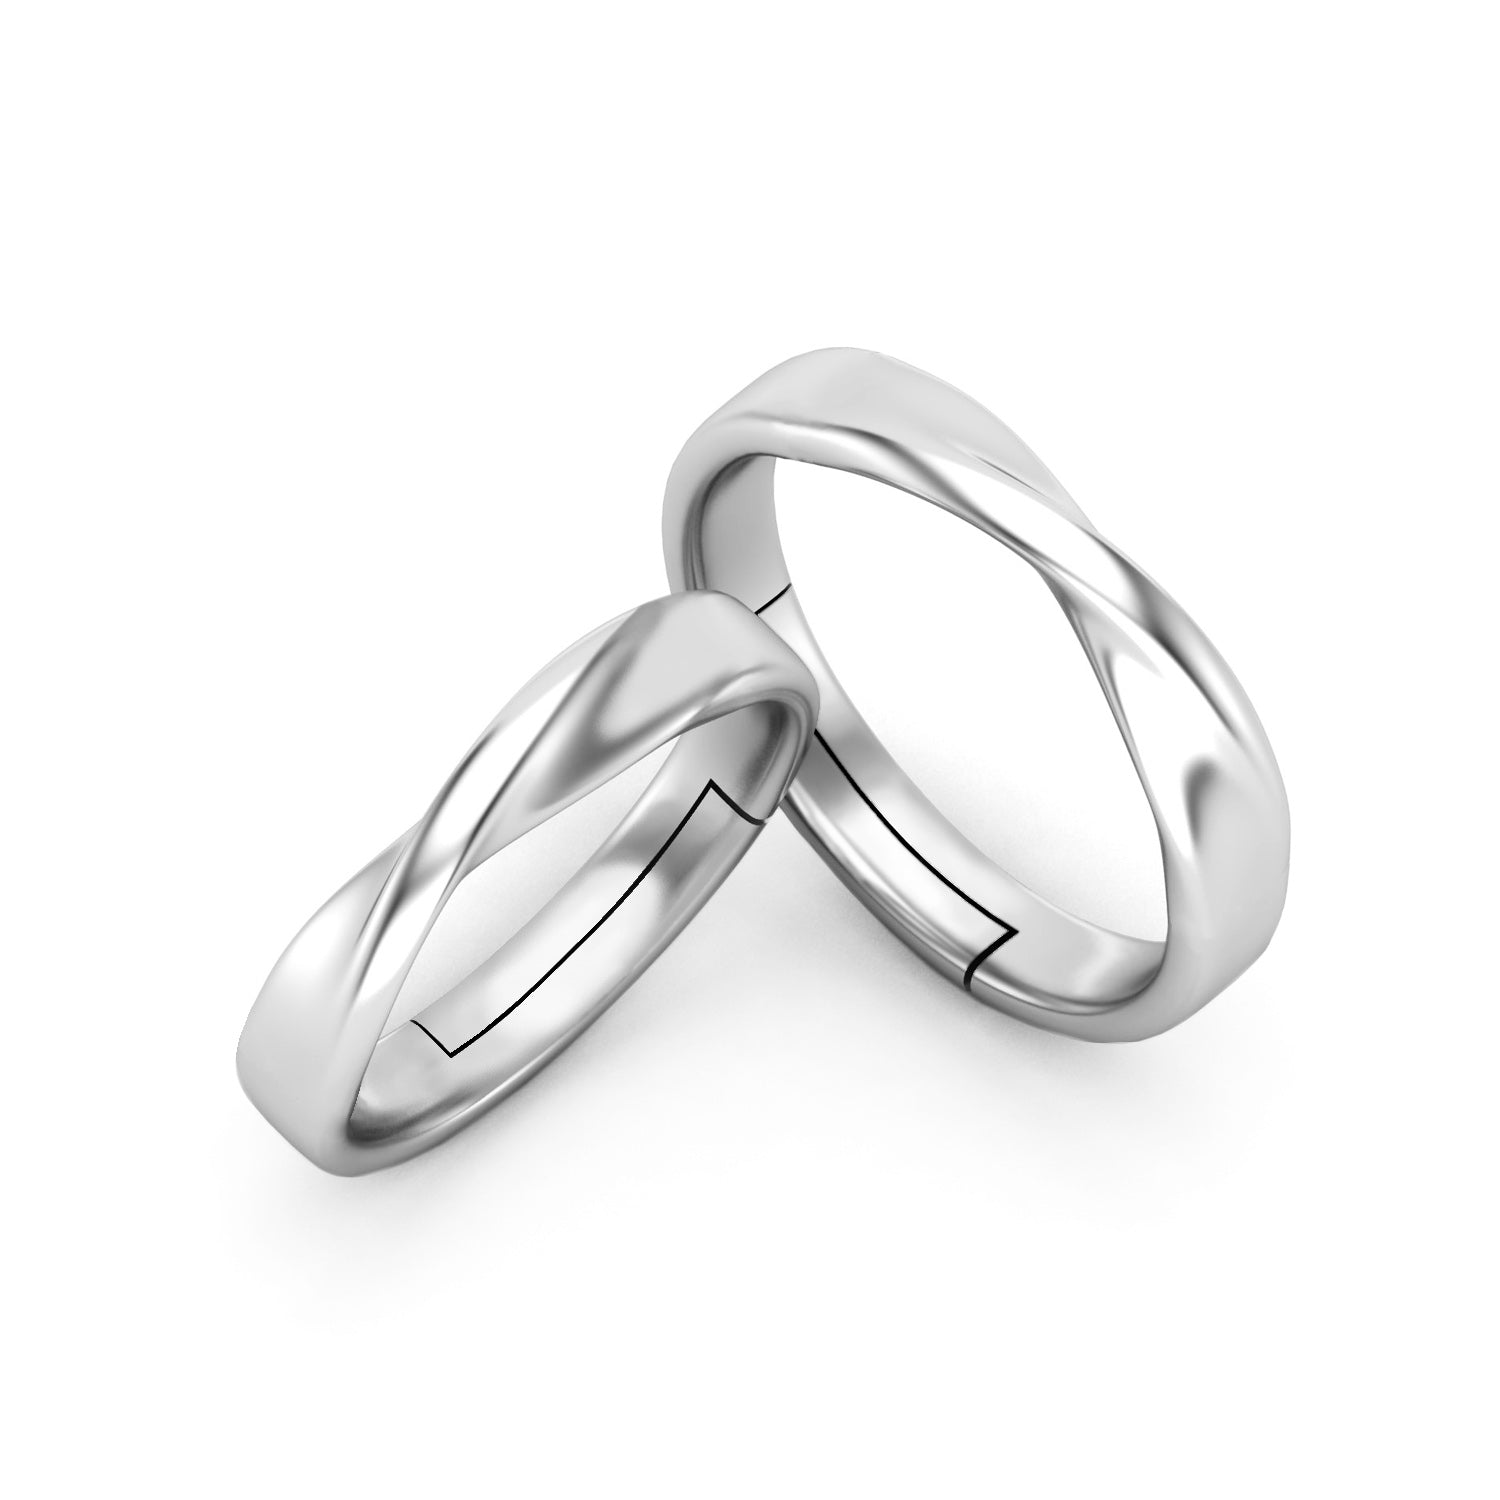 Adjustable Couple Rings Set for lovers Silver Plated Stylish Fancy  Solitaire for Men and Women 2 Pair